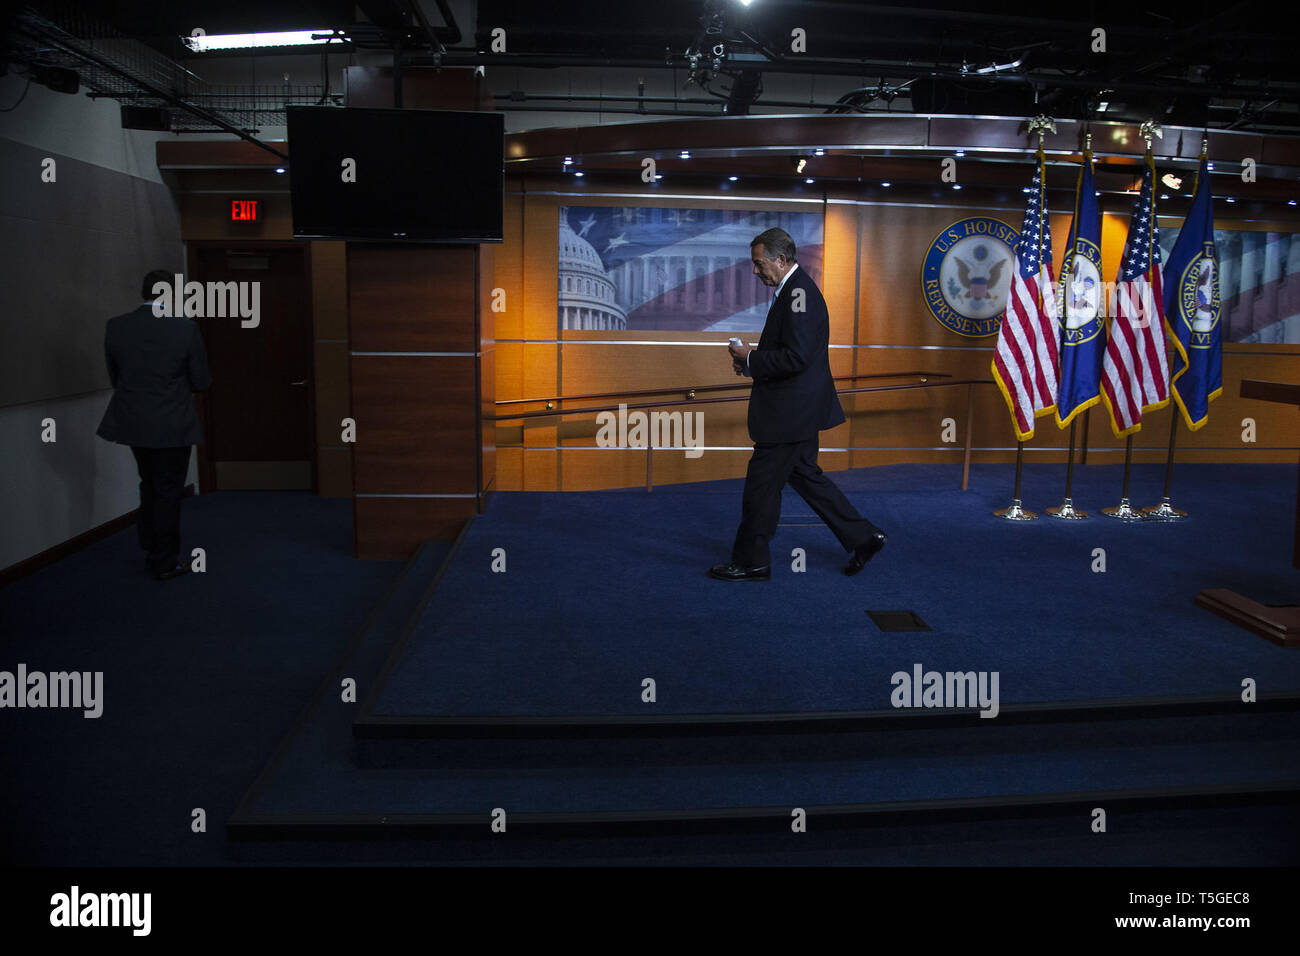 Washington, DC, USA. 18th June, 2015. Rep. John Boehner, speaker of The House, leaves a press conference in the U.S. Capitol, Washington, DC, June 18, 2015. Credit: Bill Putnam/ZUMA Wire/Alamy Live News Stock Photo